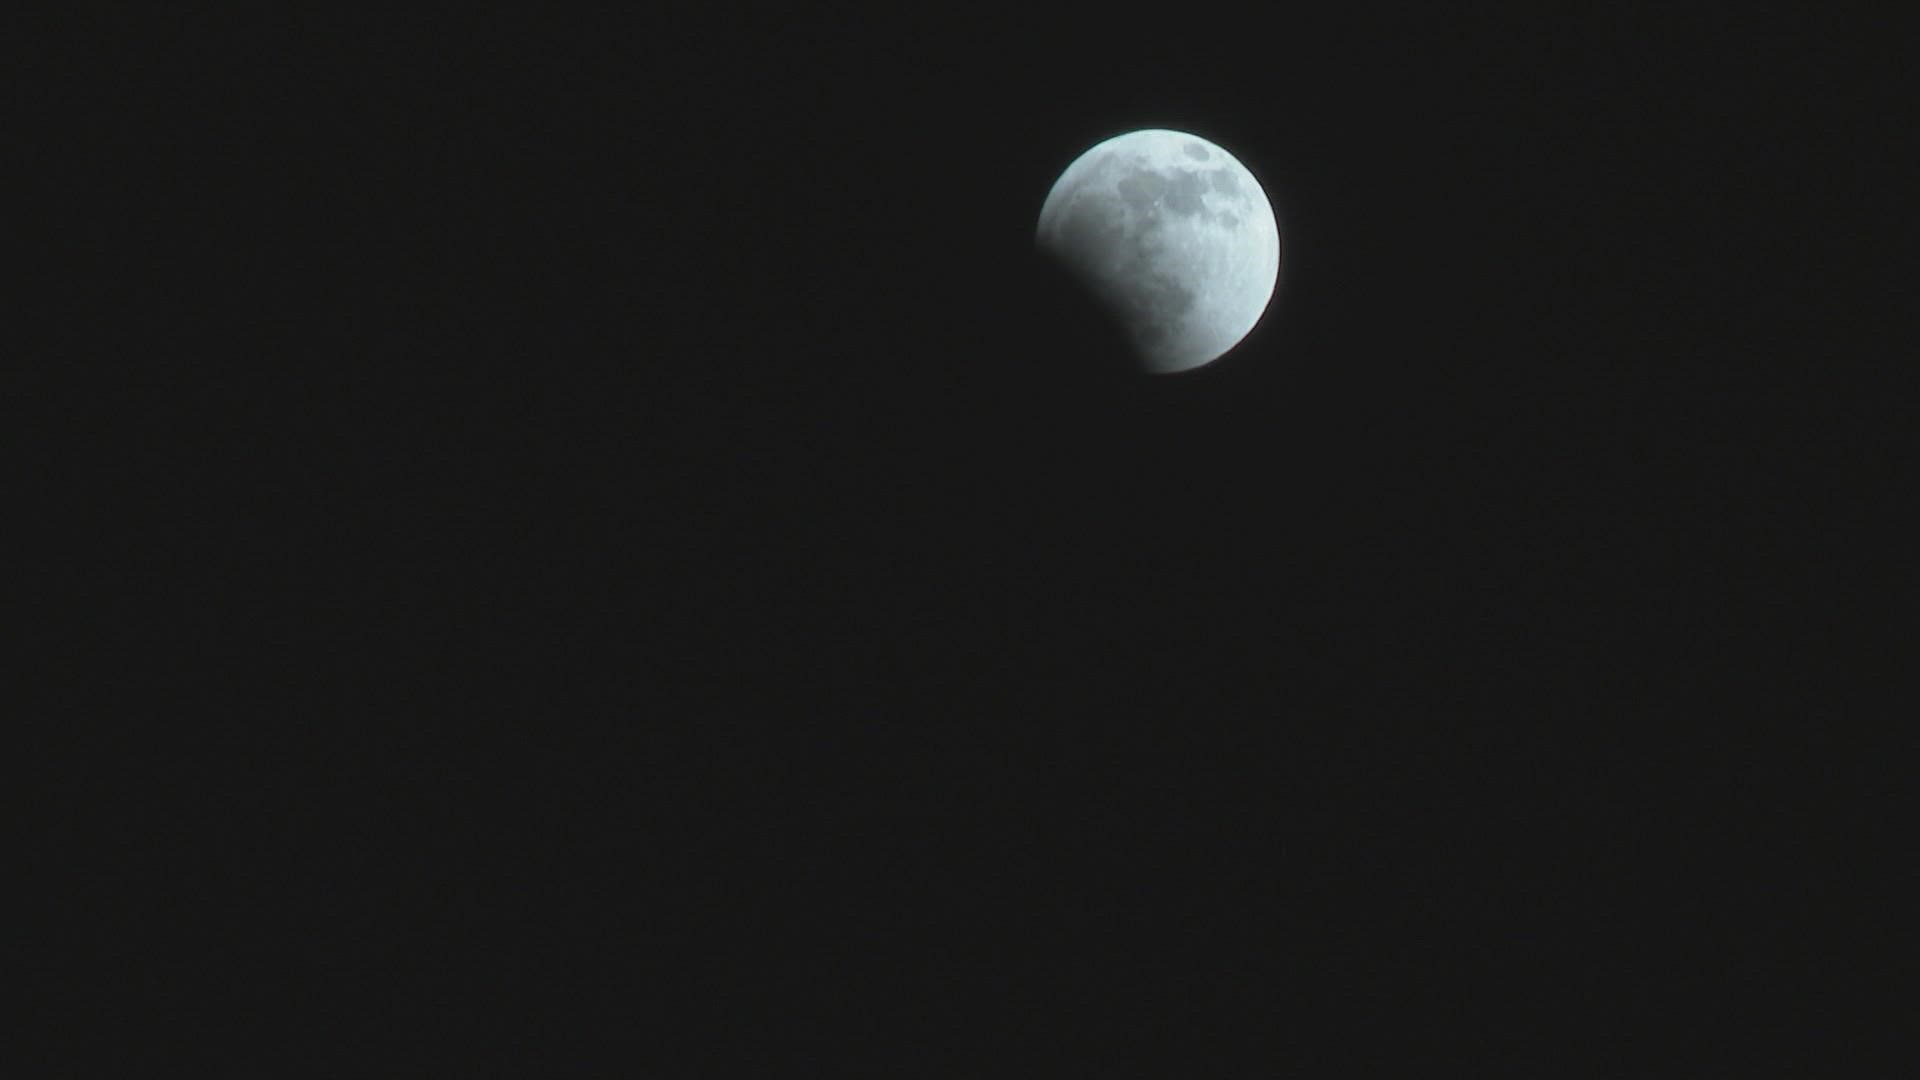 The first total lunar eclipse of 2022 happened on Sunday night, and we had ideal viewing conditions over Iowa.